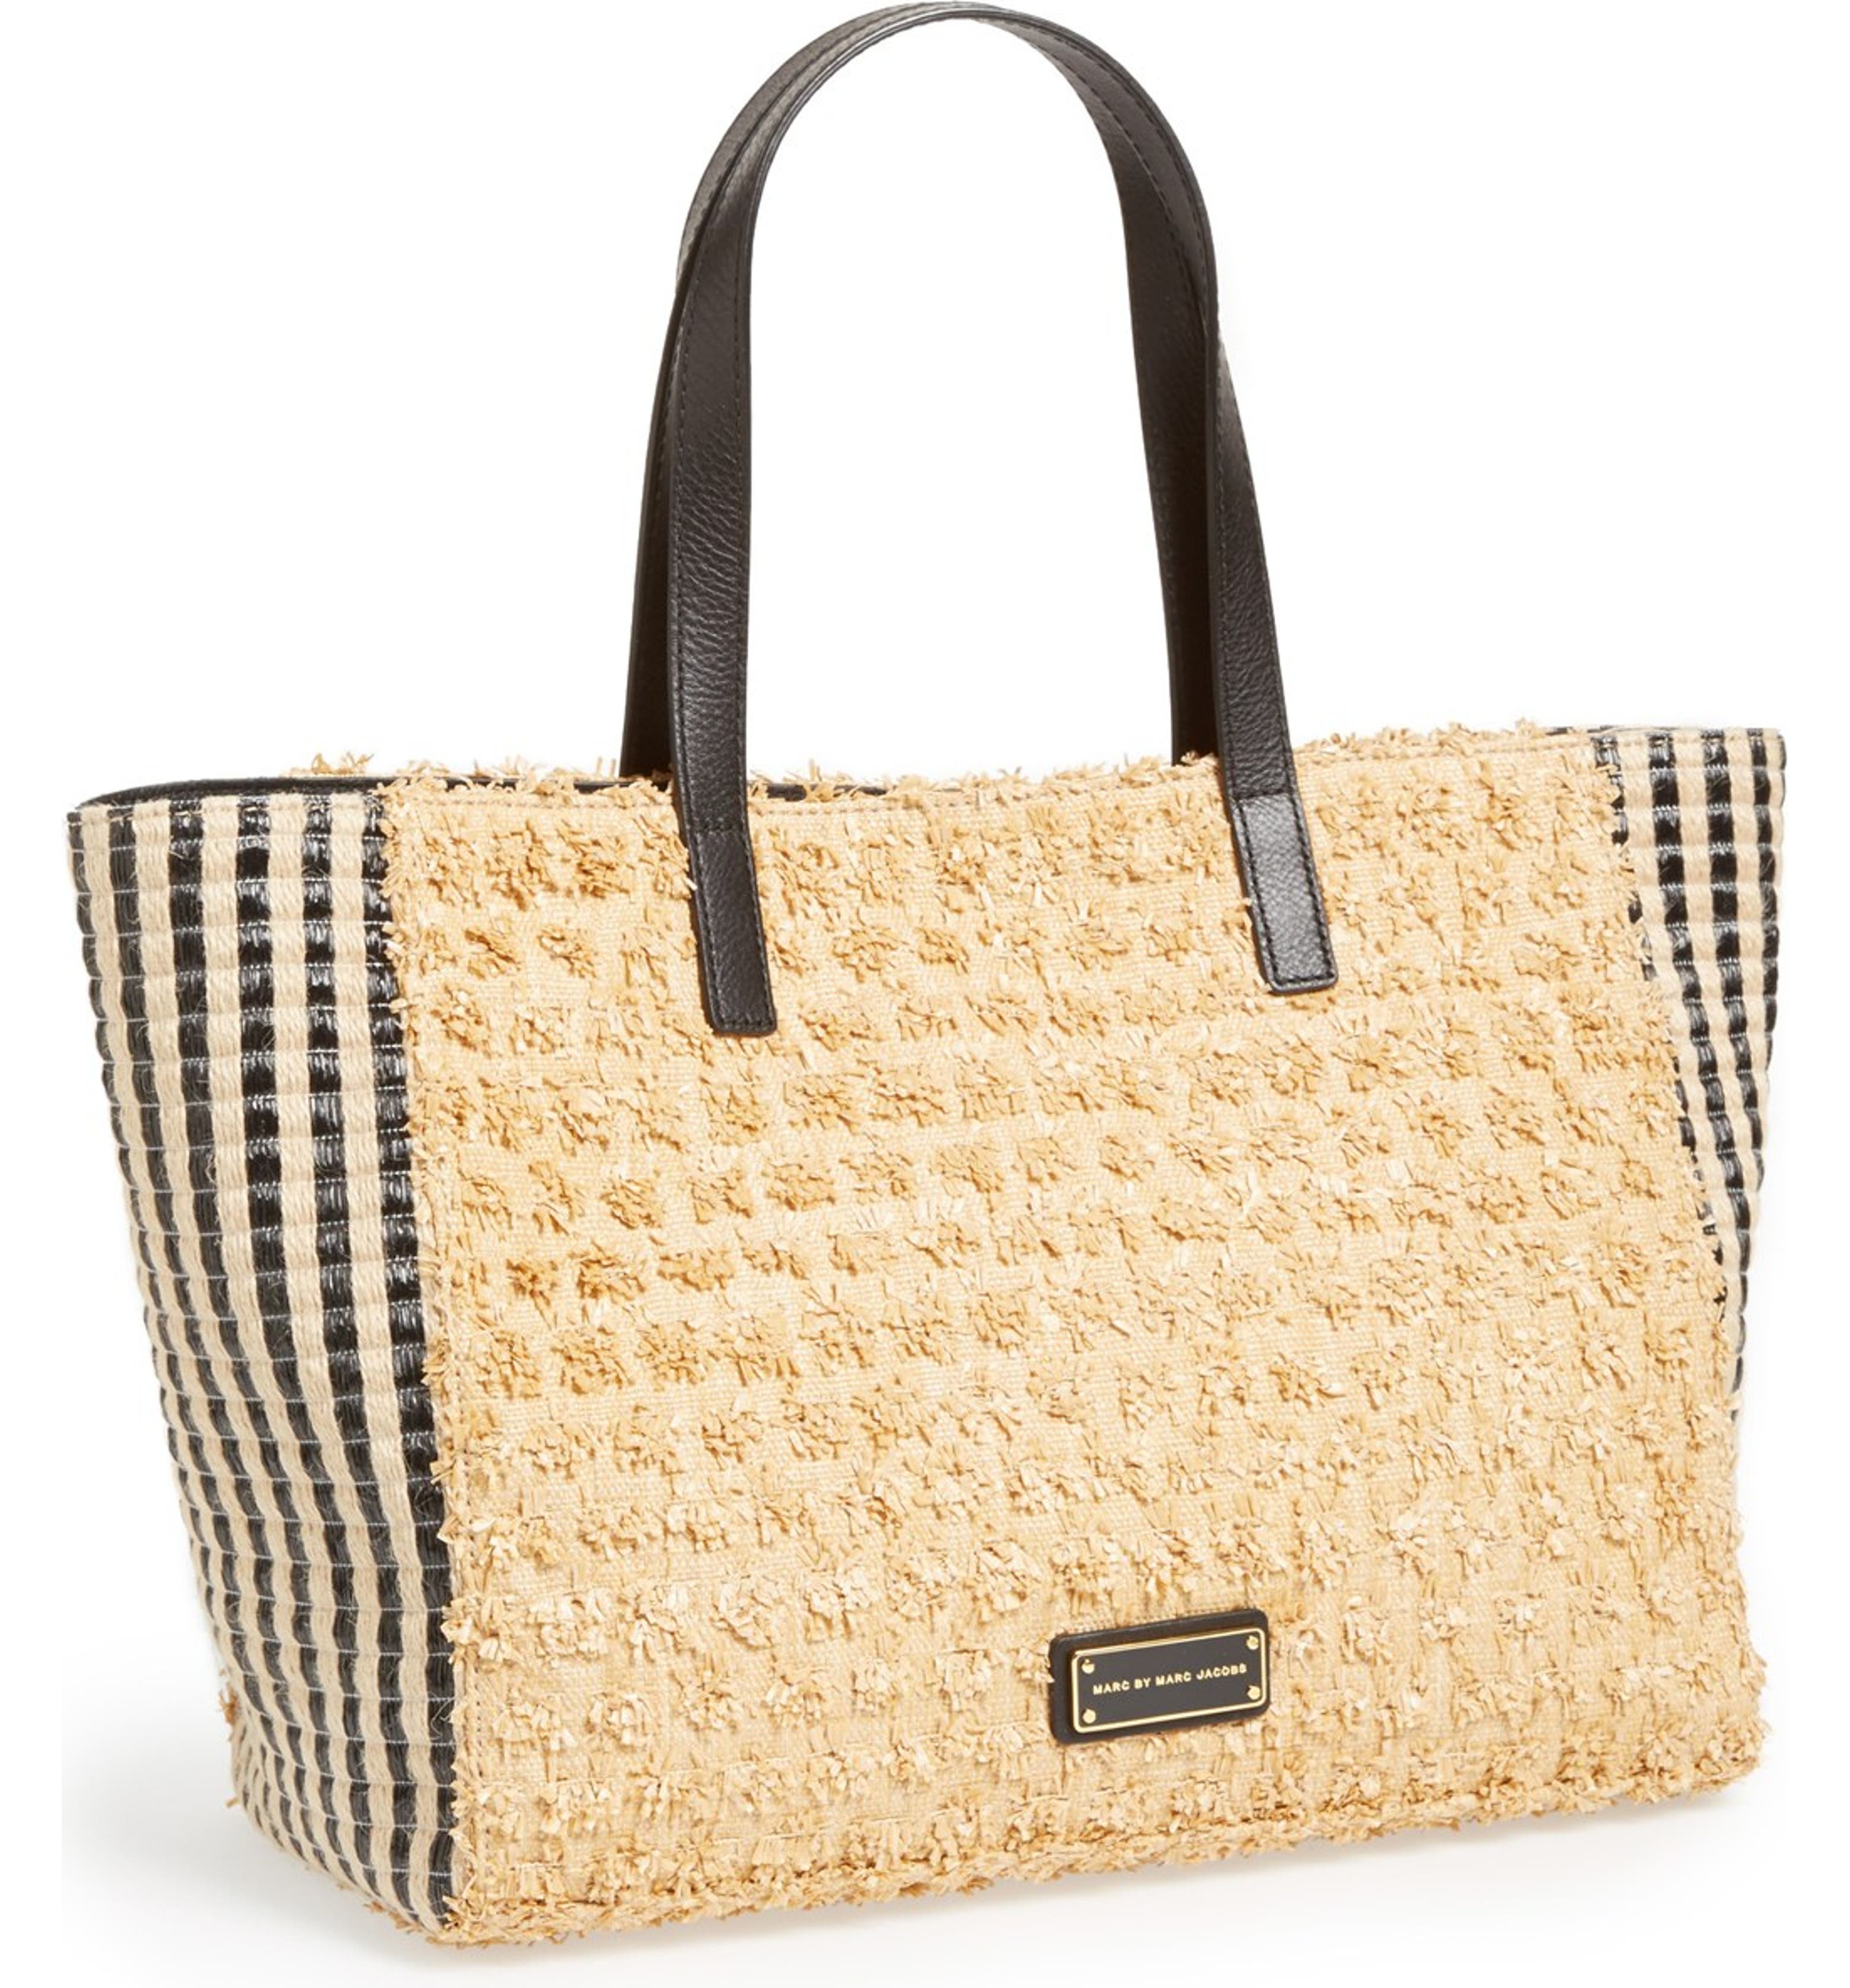 MARC BY MARC JACOBS 'Isle de Sea - Tina' Tote | Nordstrom